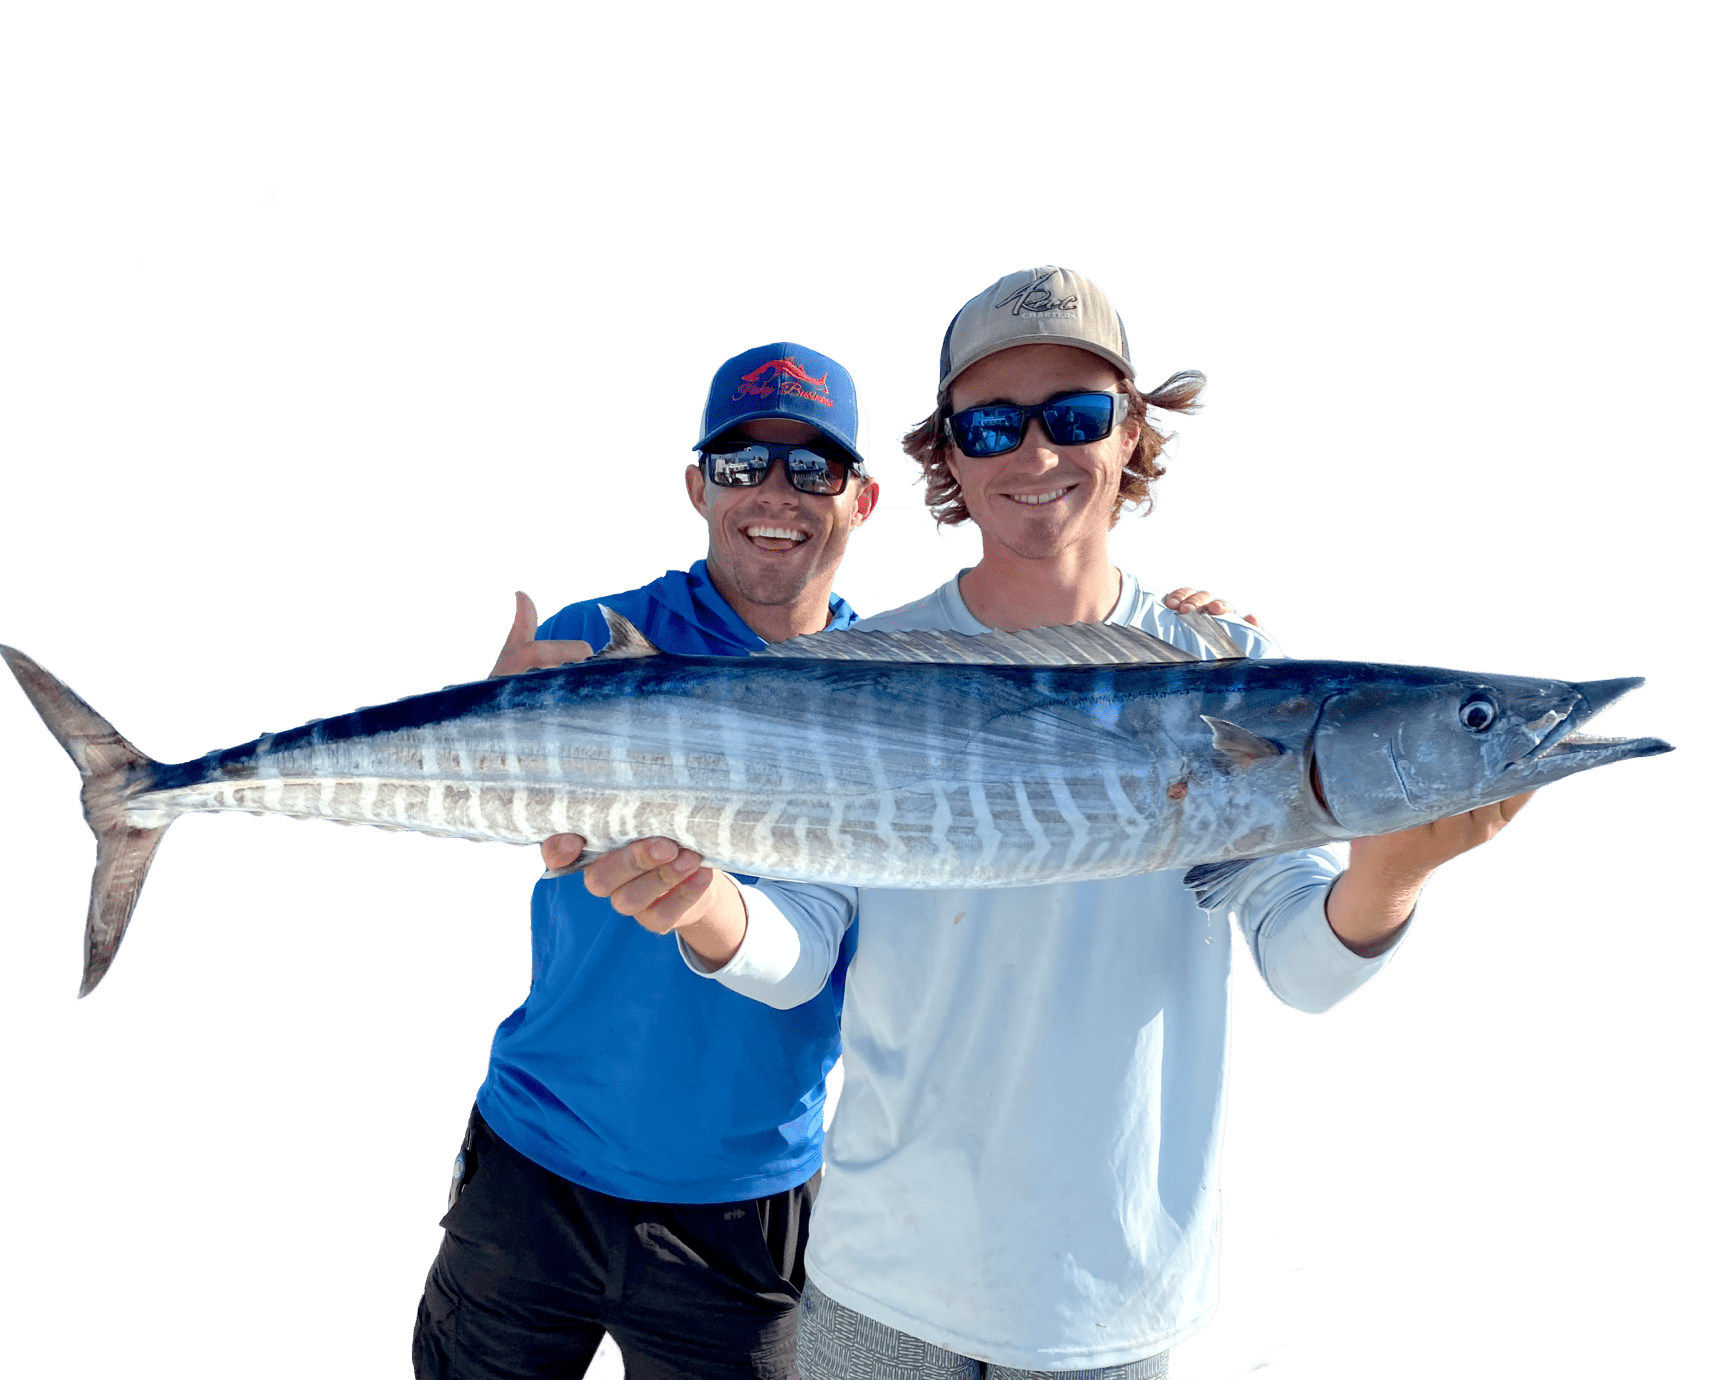 Captain Drew with adult male posing with a fish, islamorada fishing charters